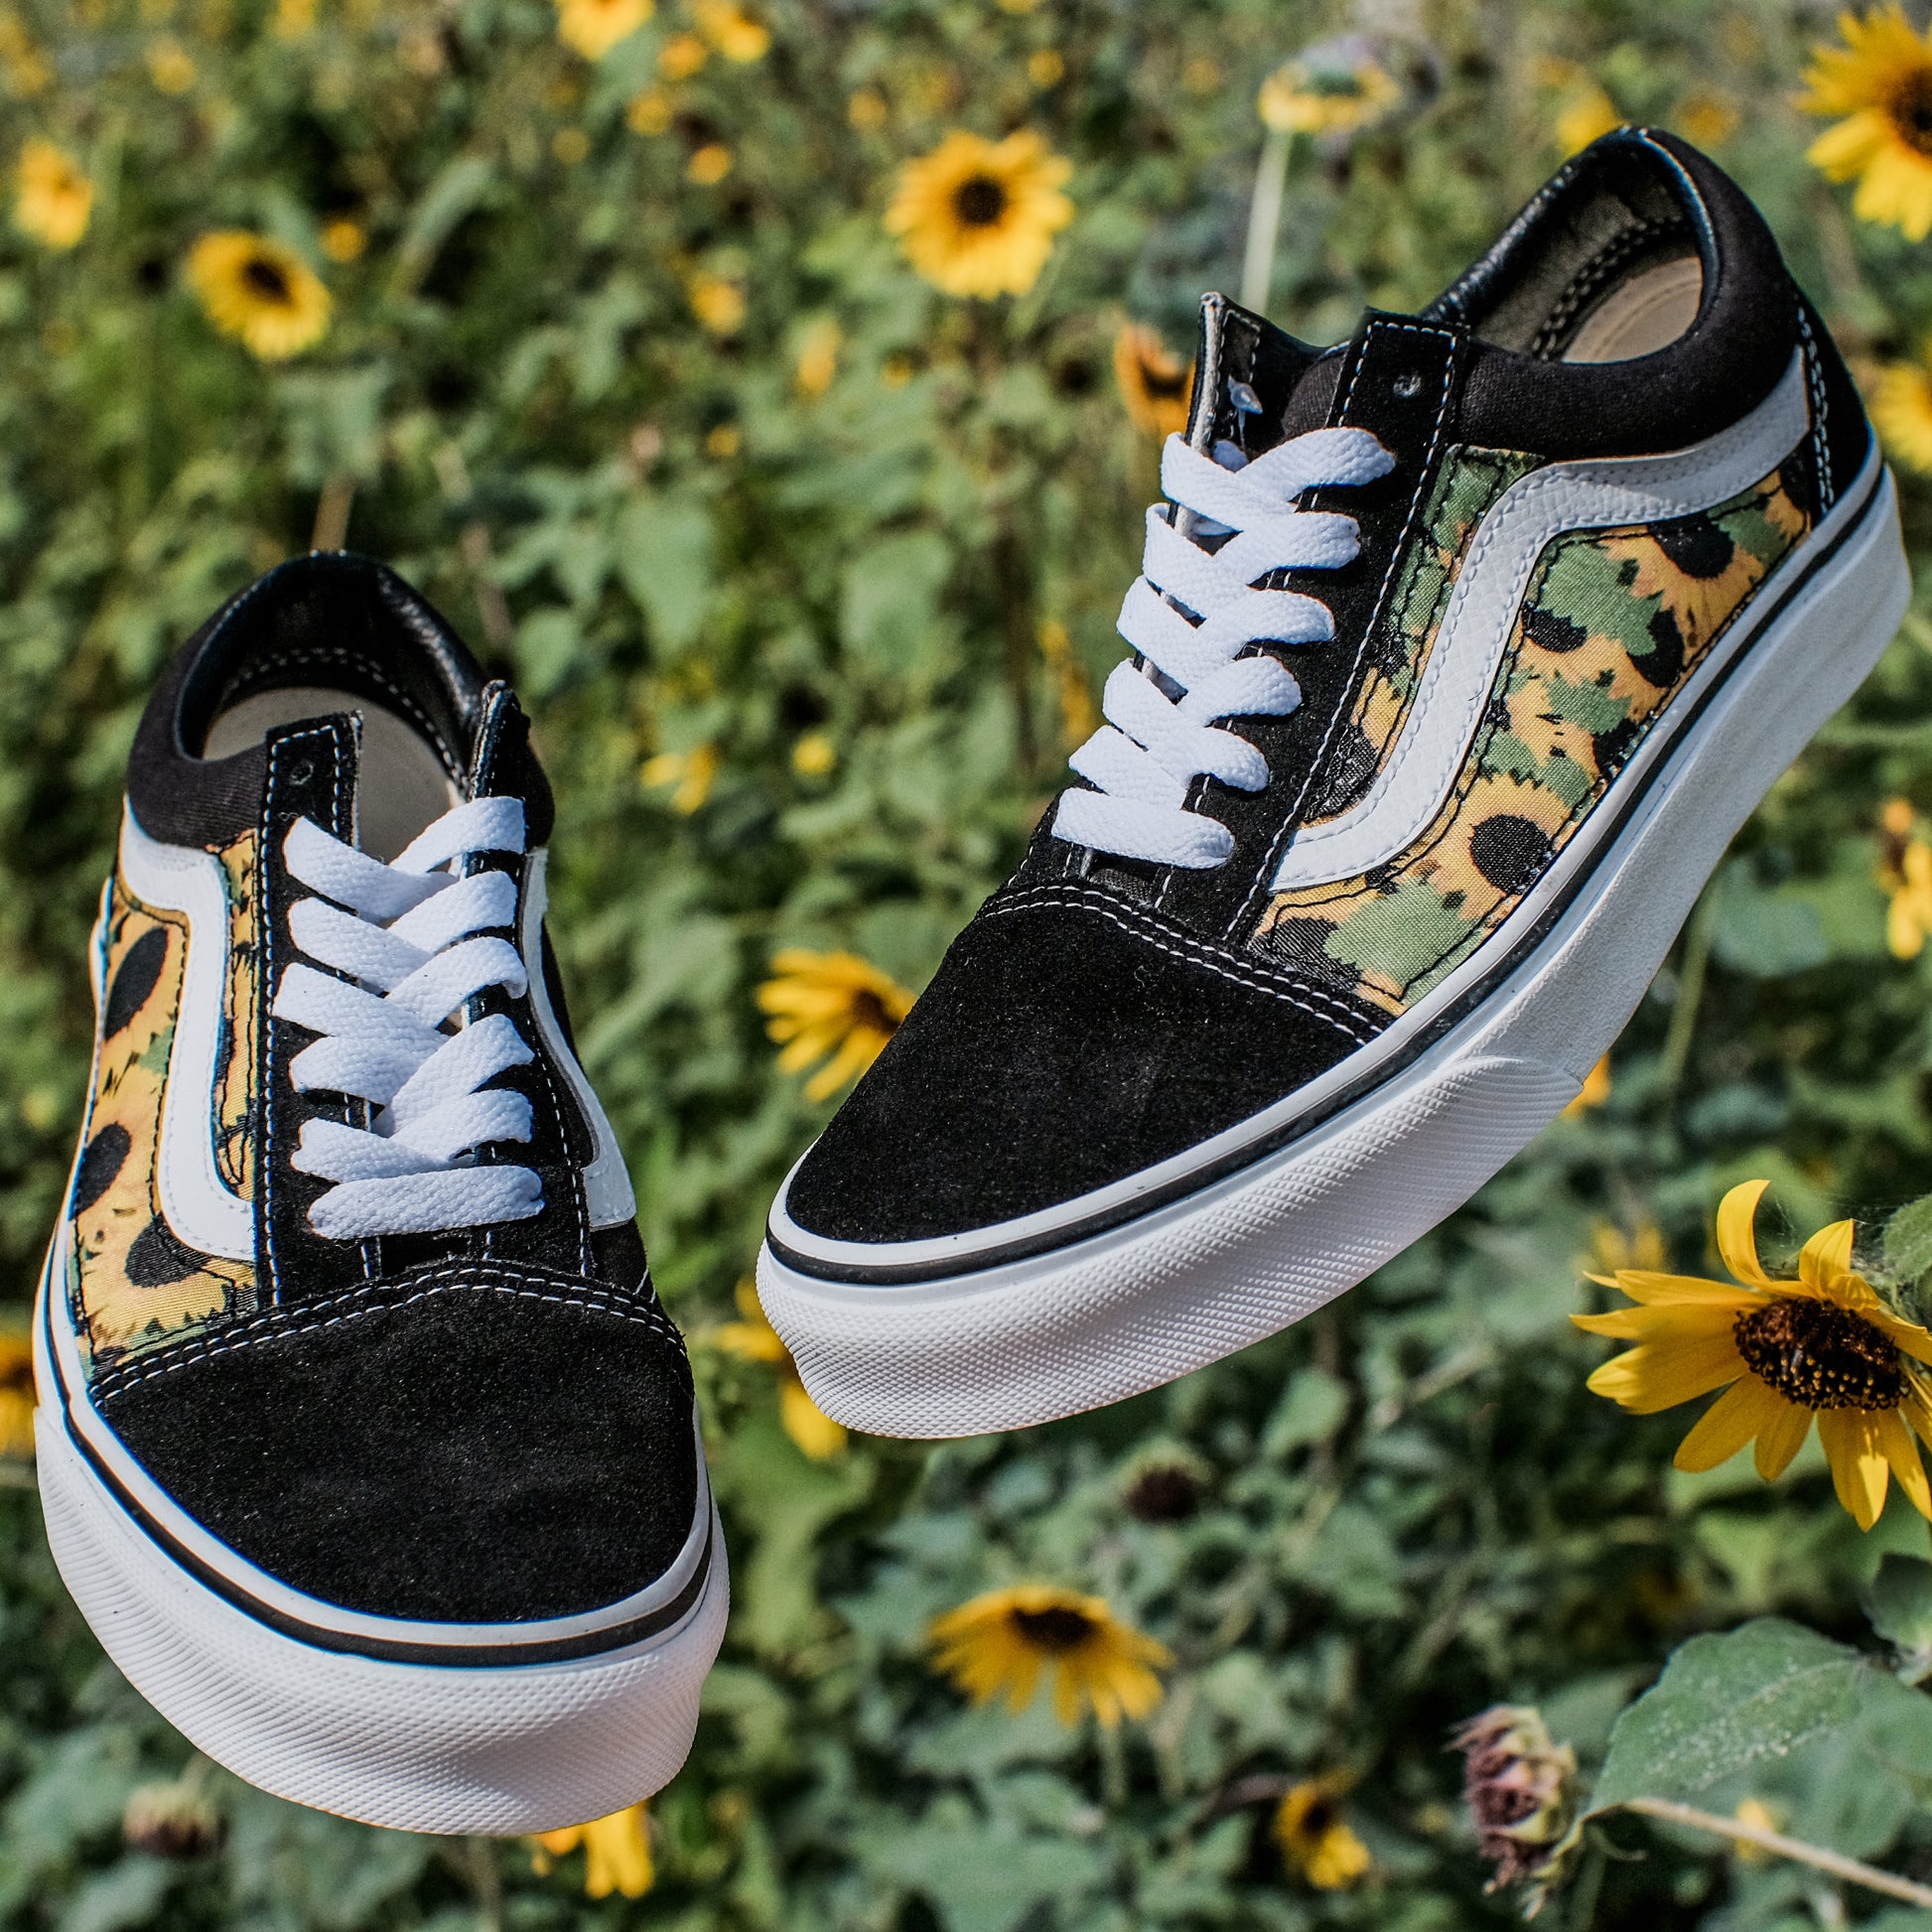 kasseapparat Quilt gidsel Vans Old Skool x Sunflower Custom Handmade Shoes By Patch Collection